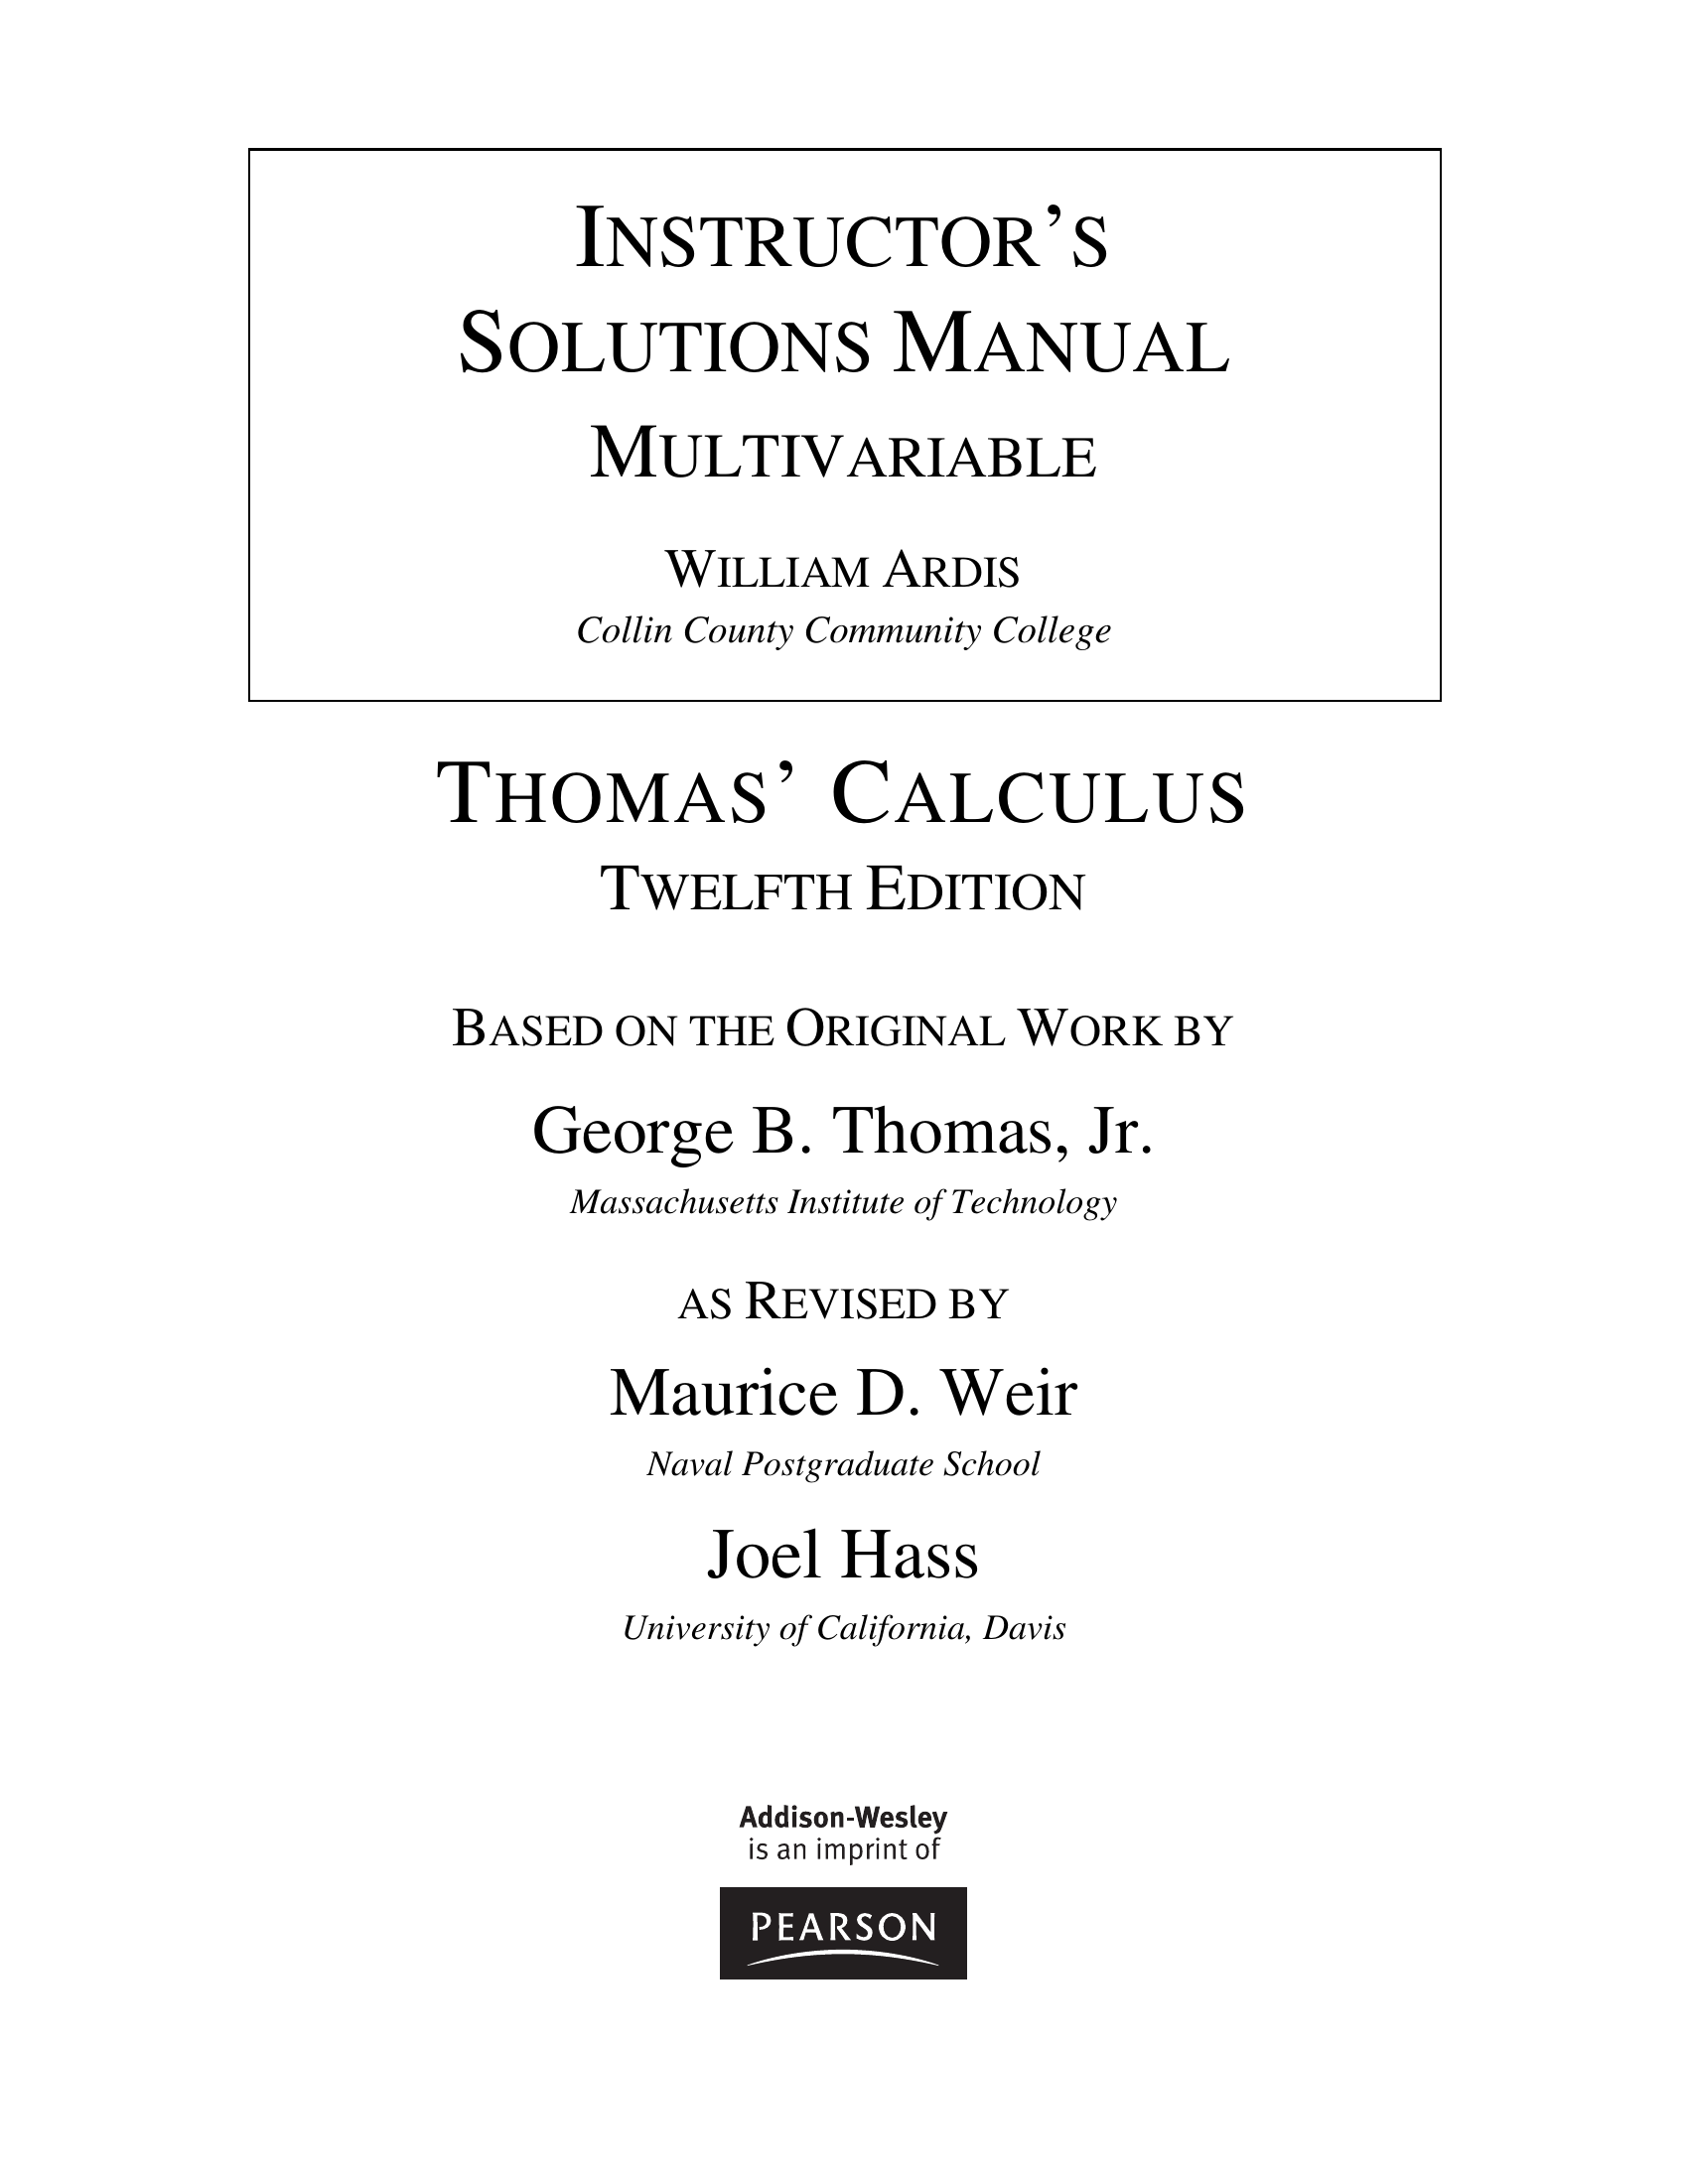 Thomas Calculus solution manual Complete with All Chapters